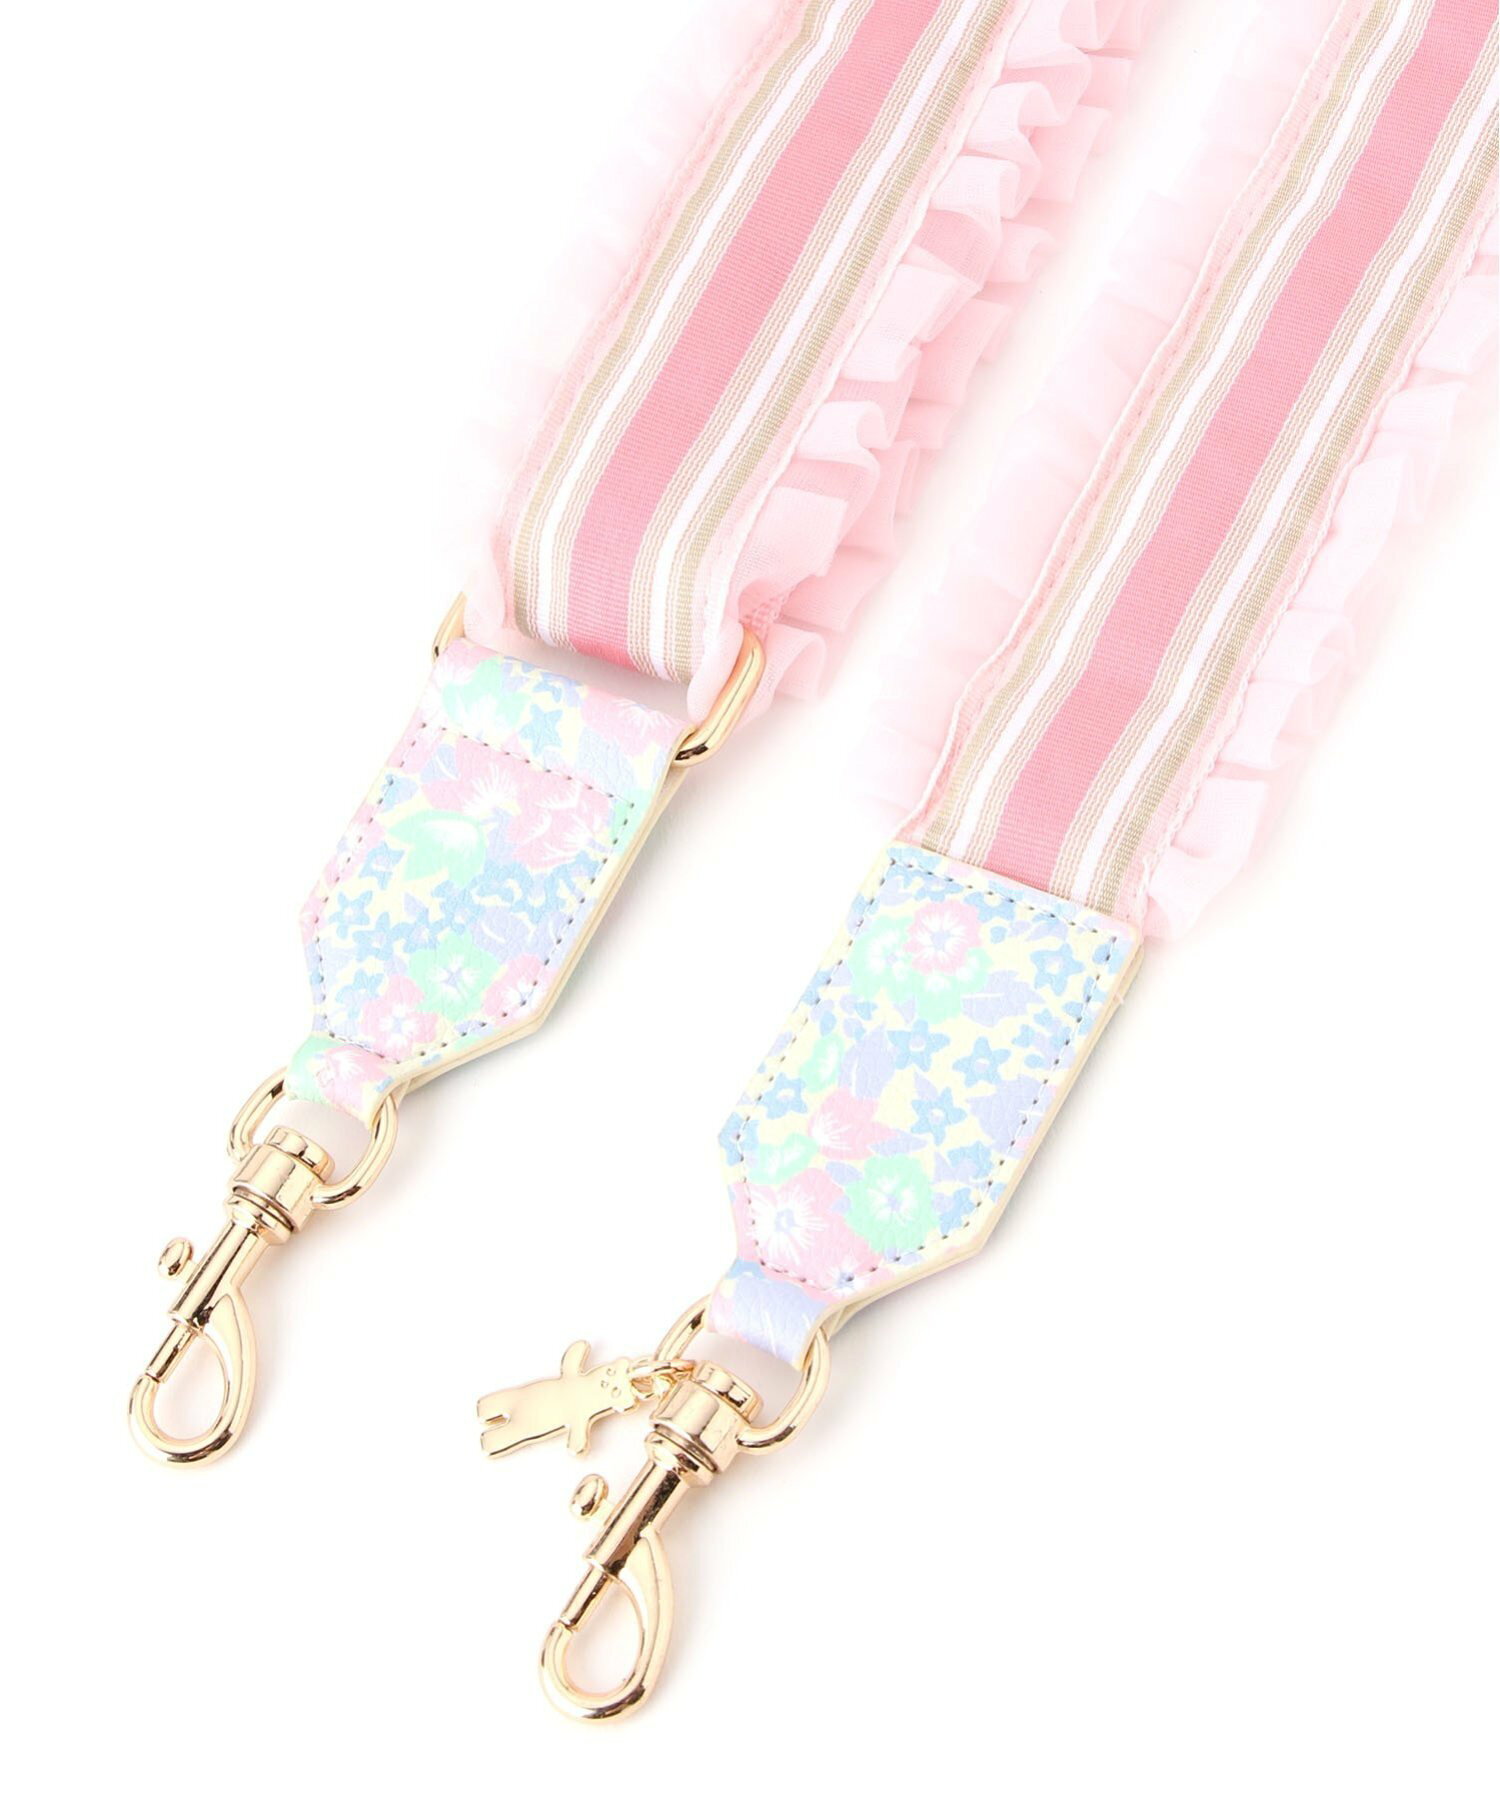 (K)MARY LOUISE_SHOULDERSTRAP